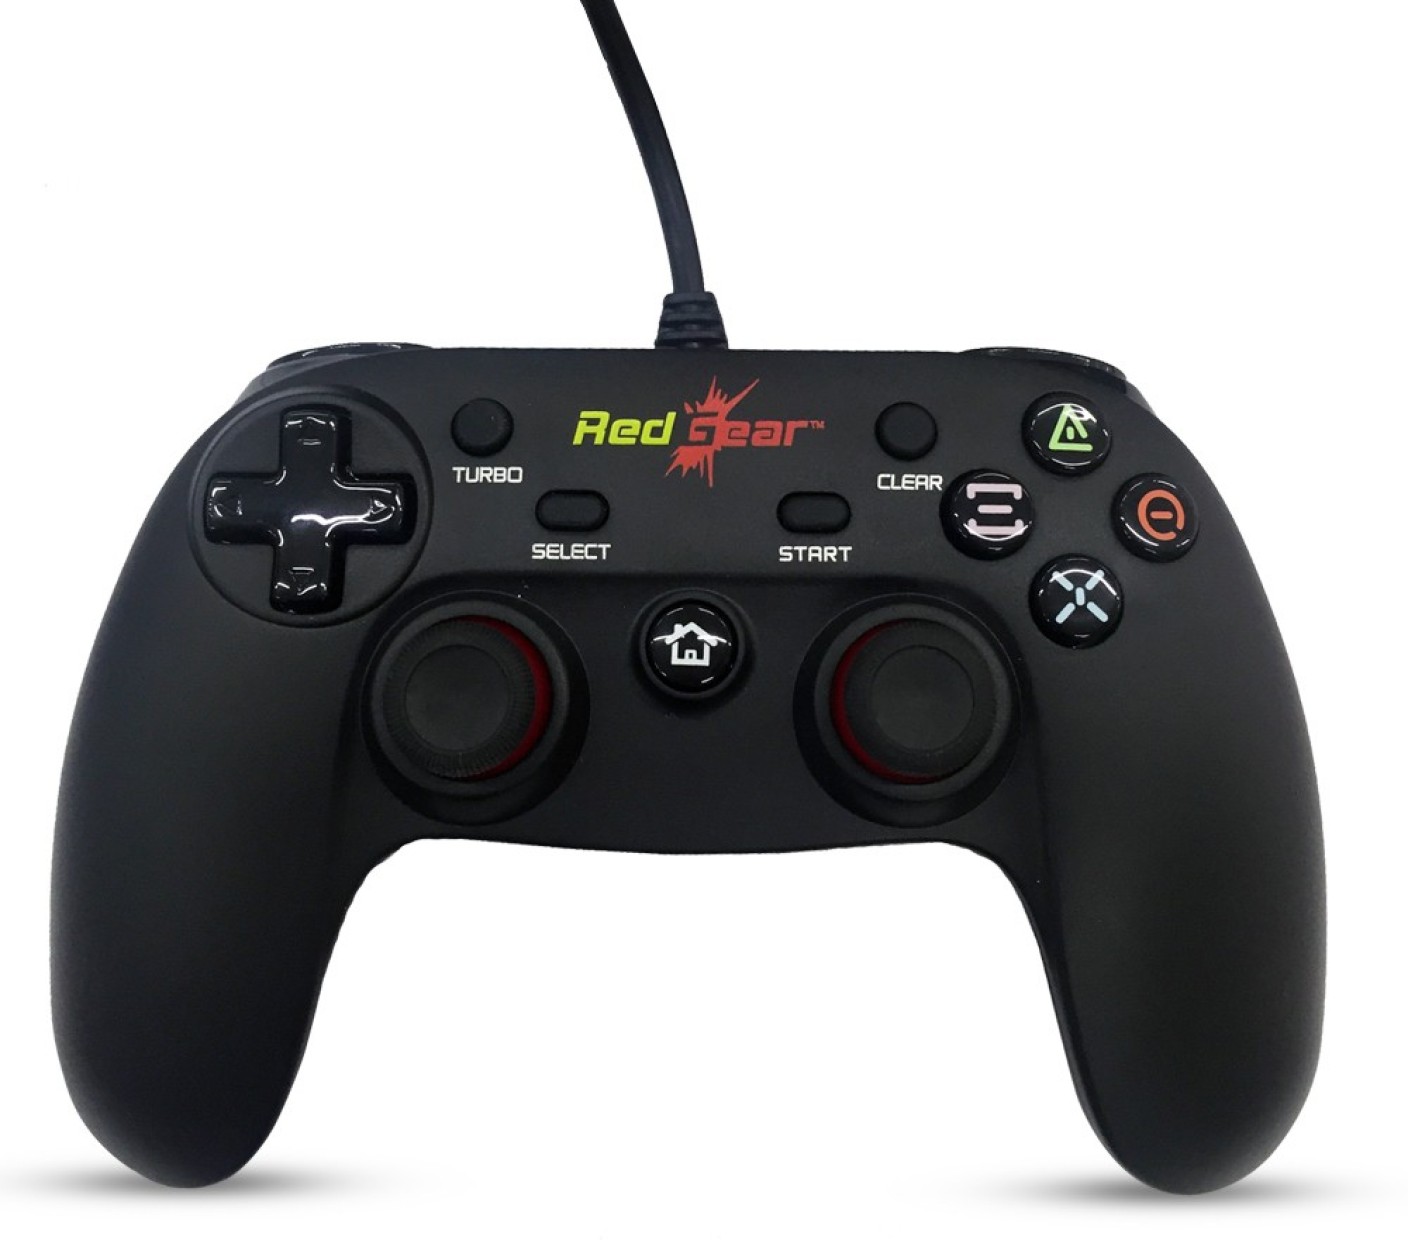 Top 10 gamepads for PC Gaming